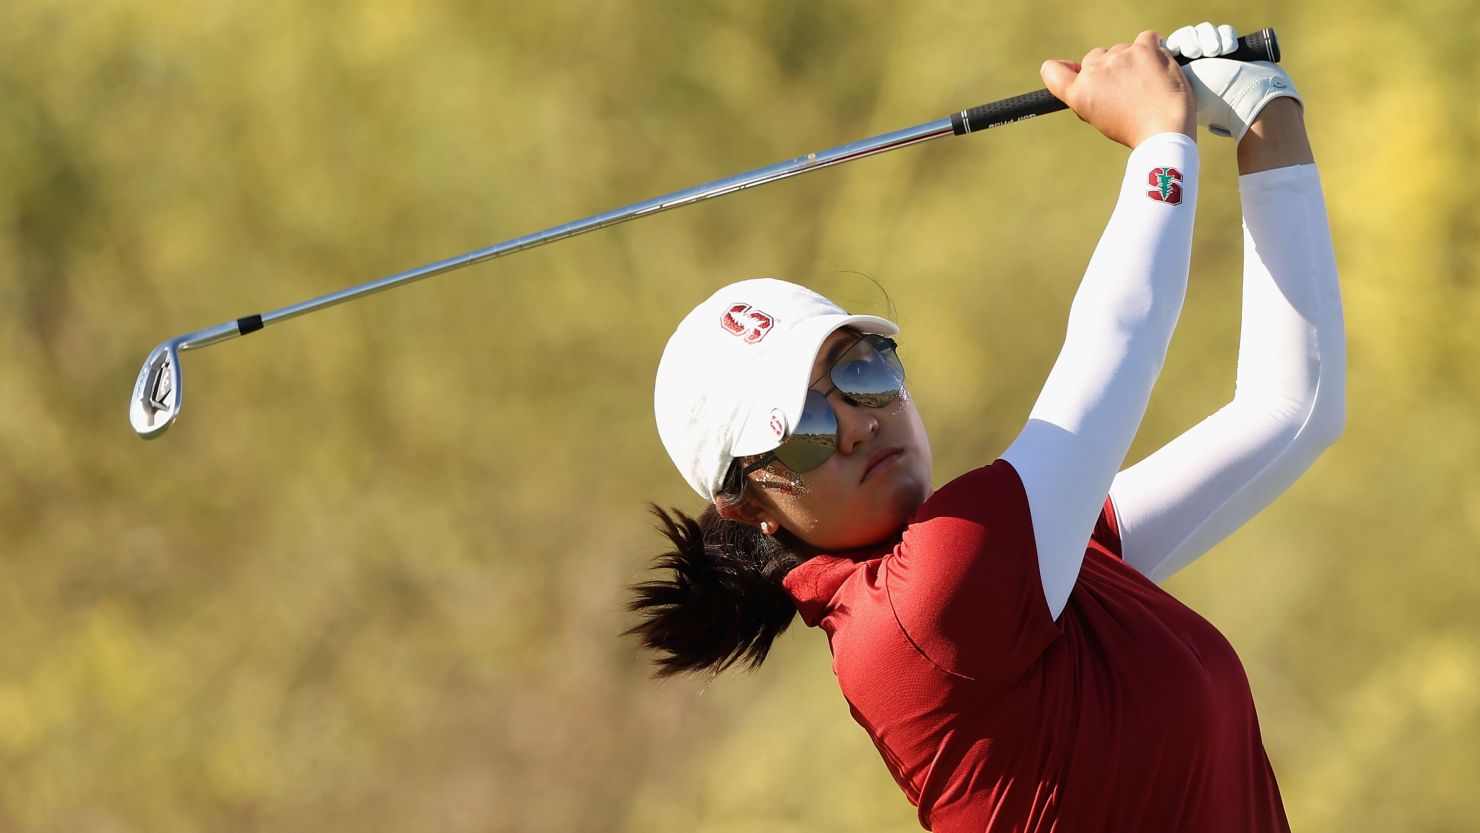 SCOTTSDALE, ARIZONA - MAY 22:  Rose Zhang of the Stanford Cardinal plays a tee shot on the 16th hole during the NCAA women's Golf Championships at Grayhawk Golf Club on May 22, 2023 in Scottsdale, Arizona. (Photo by Christian Petersen/Getty Images)